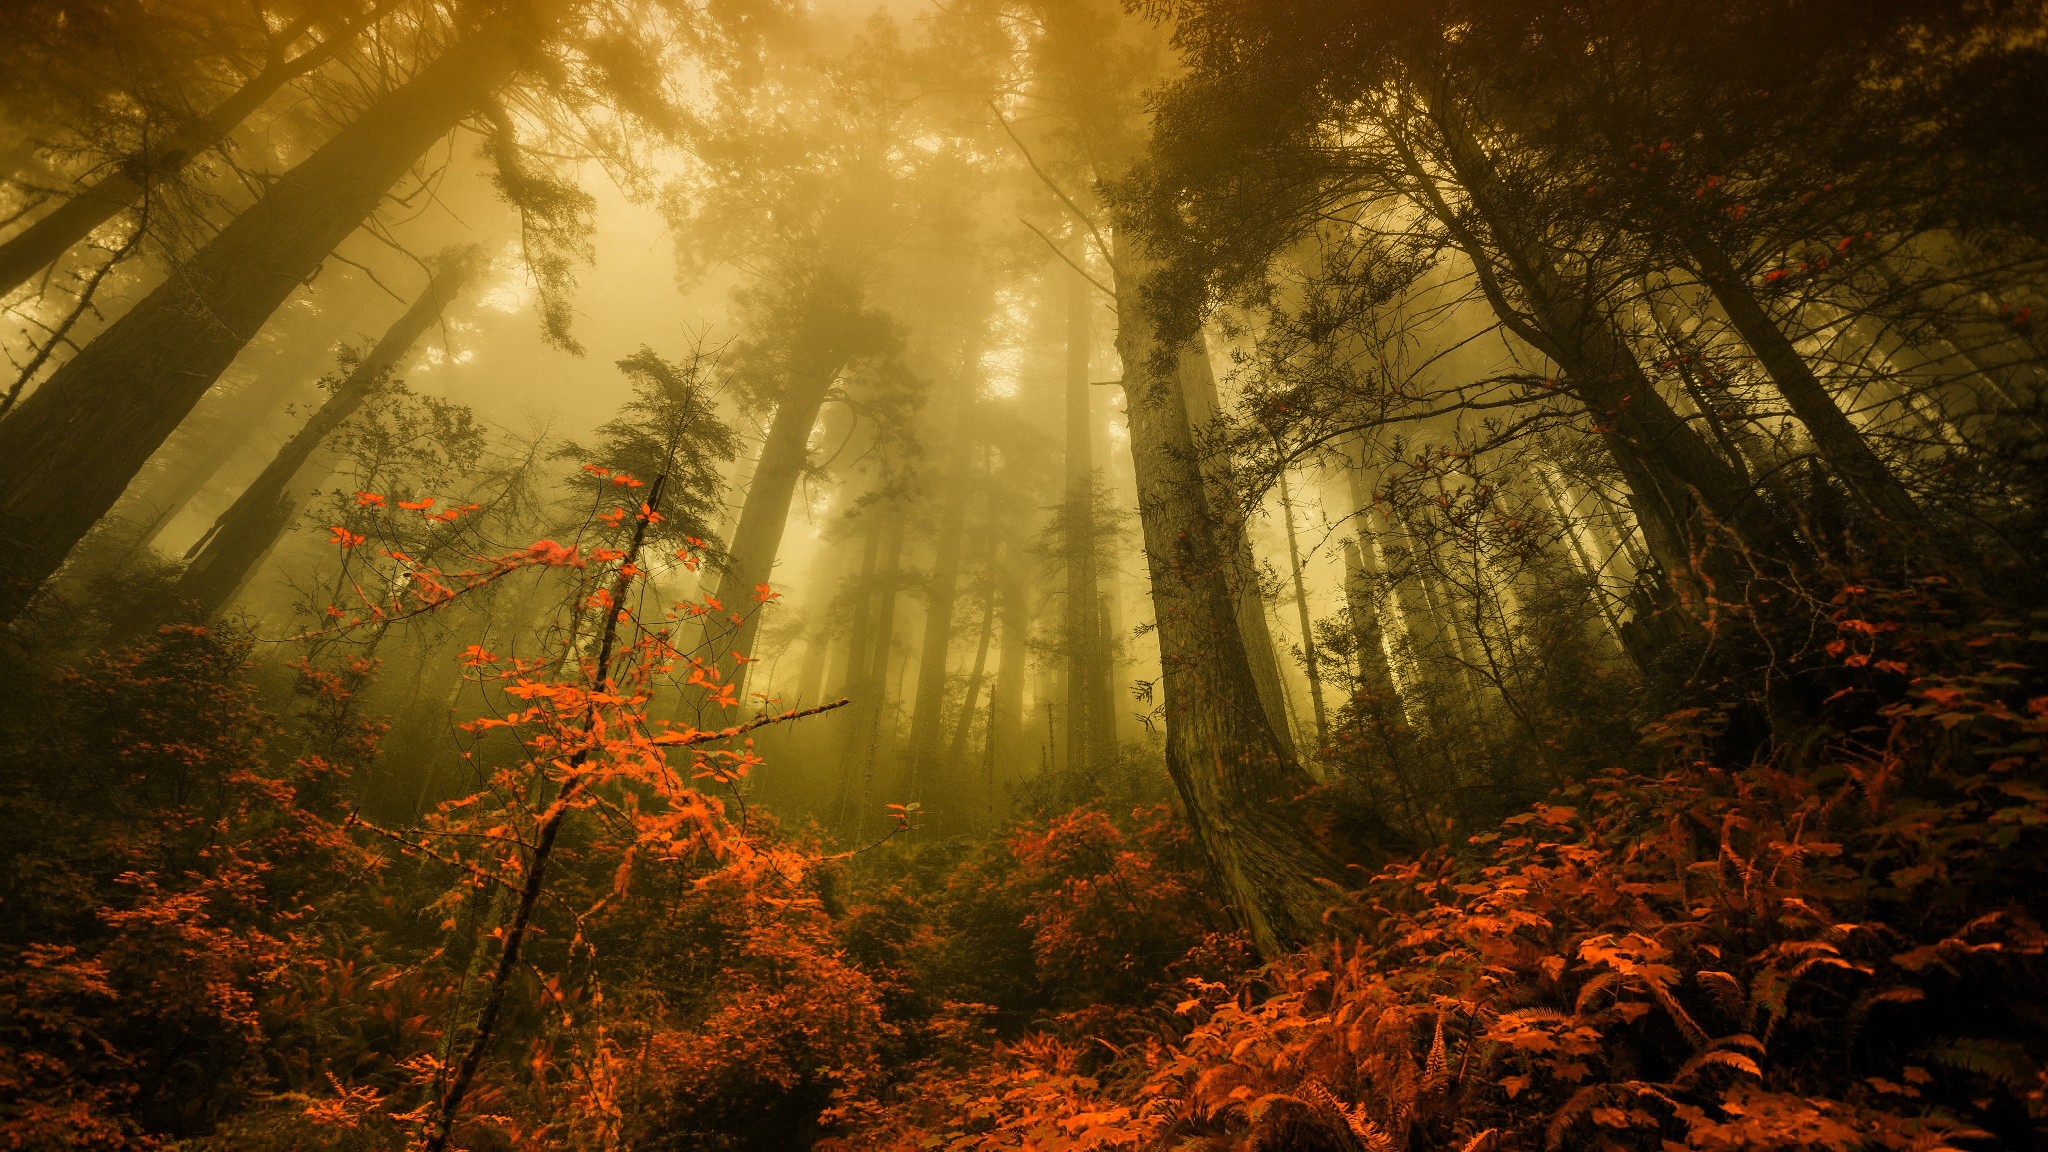 General 2048x1152 nature forest fall trees mist morning low-angle